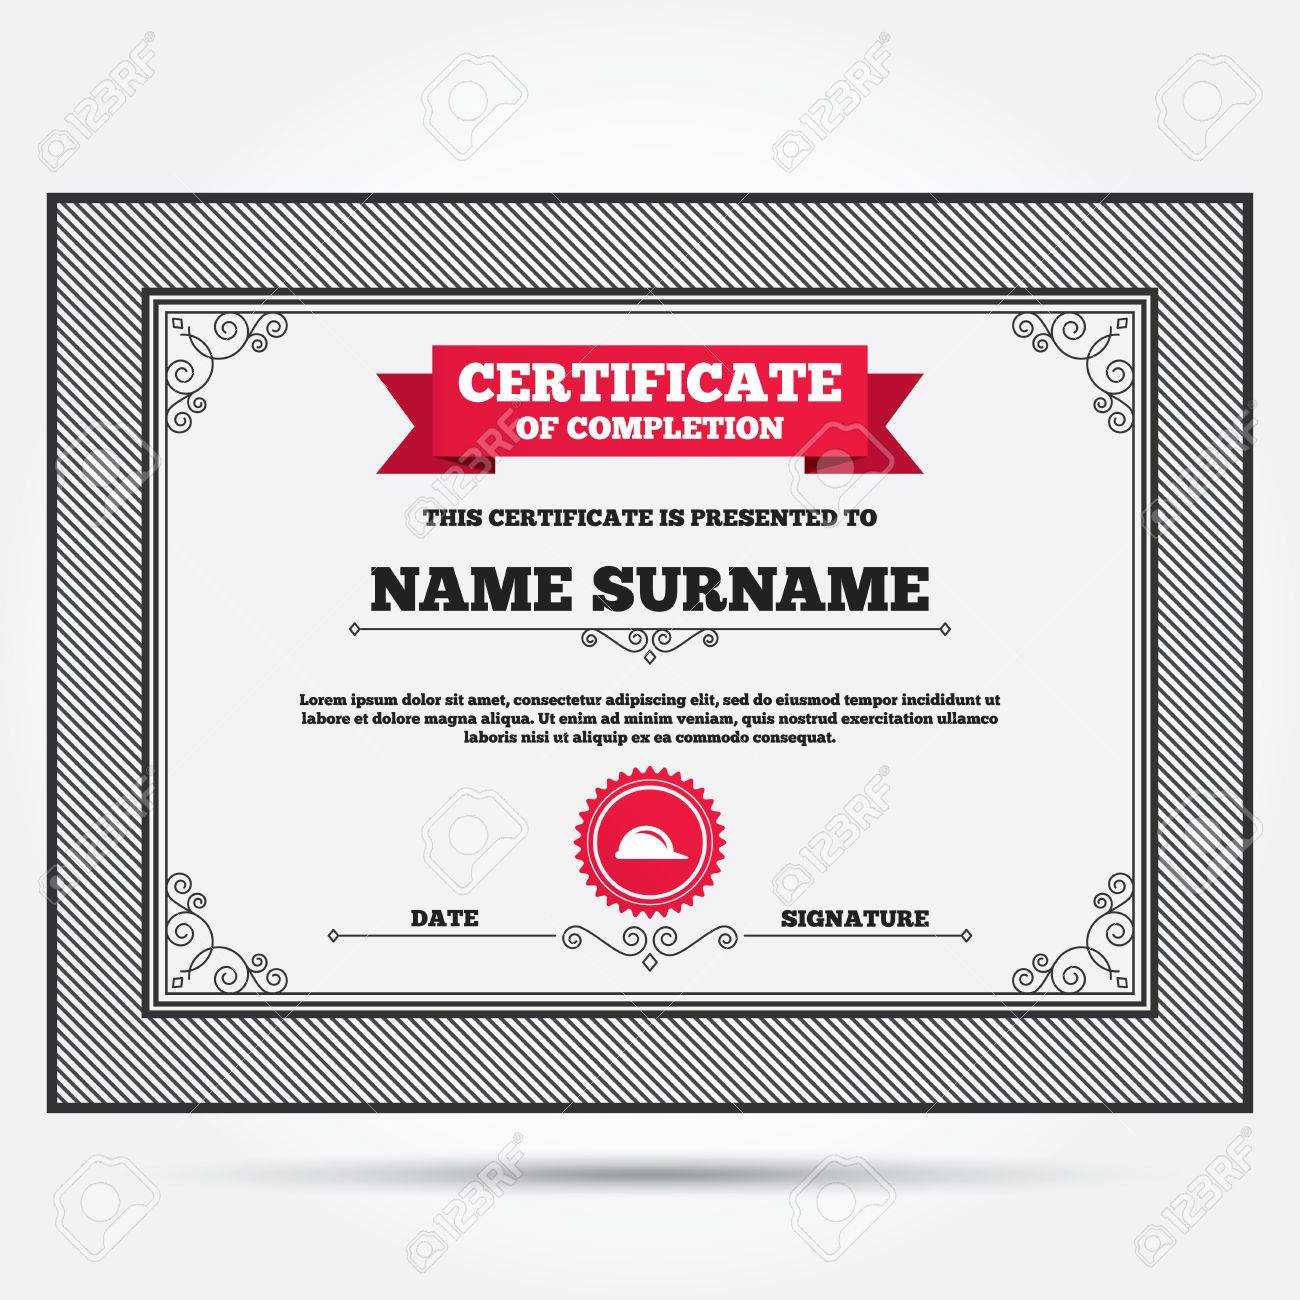 Certificate Of Completion. Hard Hat Sign Icon. Construction Helmet.. In Construction Certificate Of Completion Template